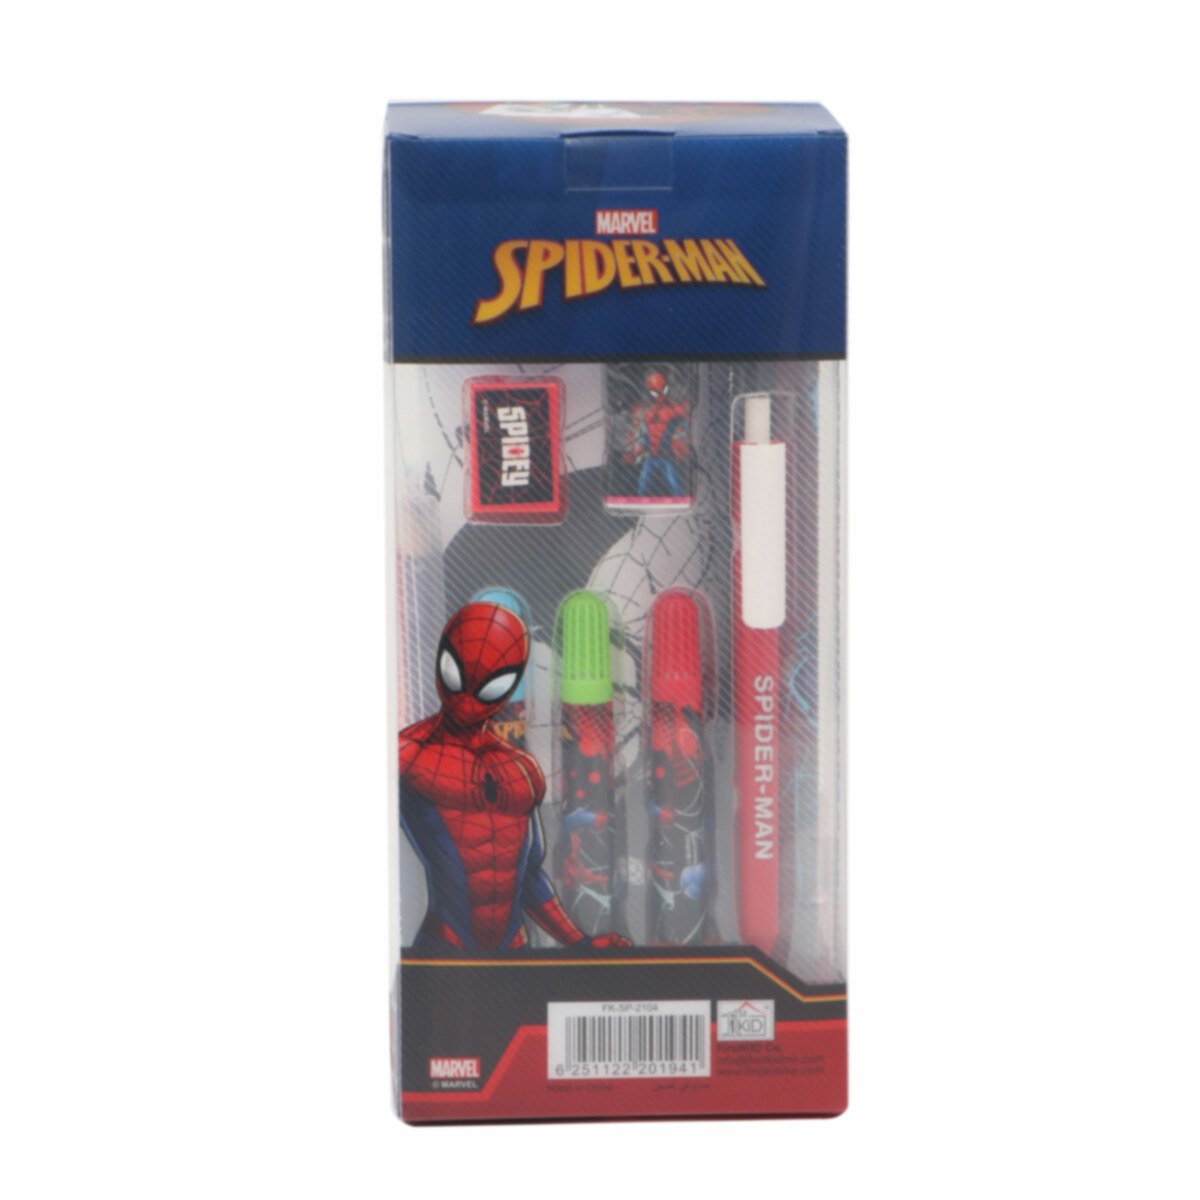 Spiderman Coloring Set with Case FKSP2104